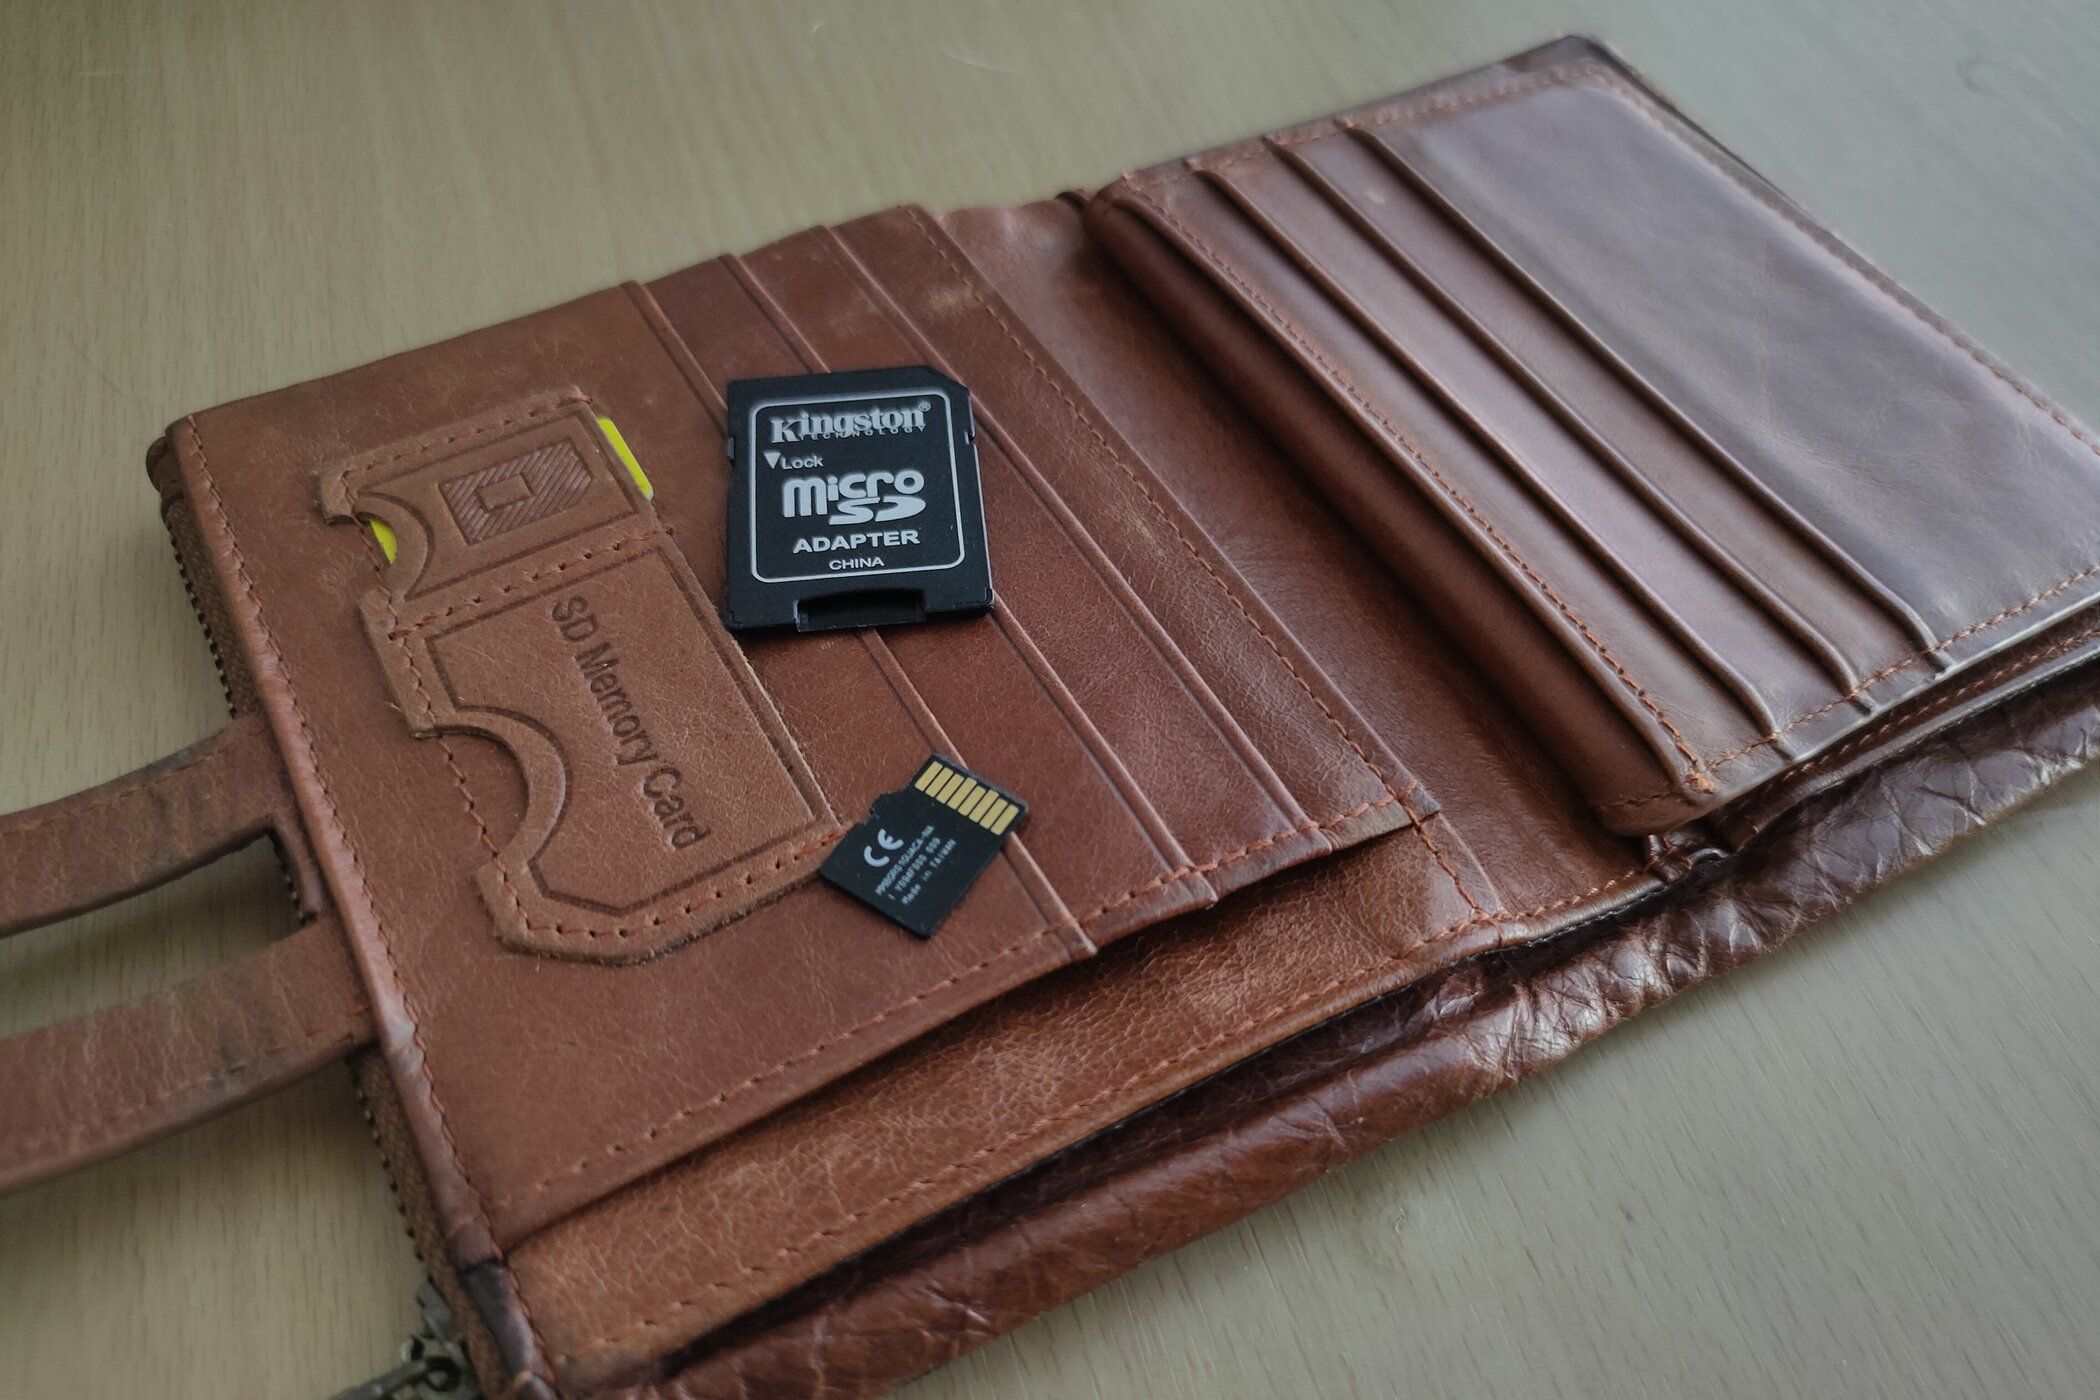 A microSD card and SD card adapter placed on a brown leather wallet.